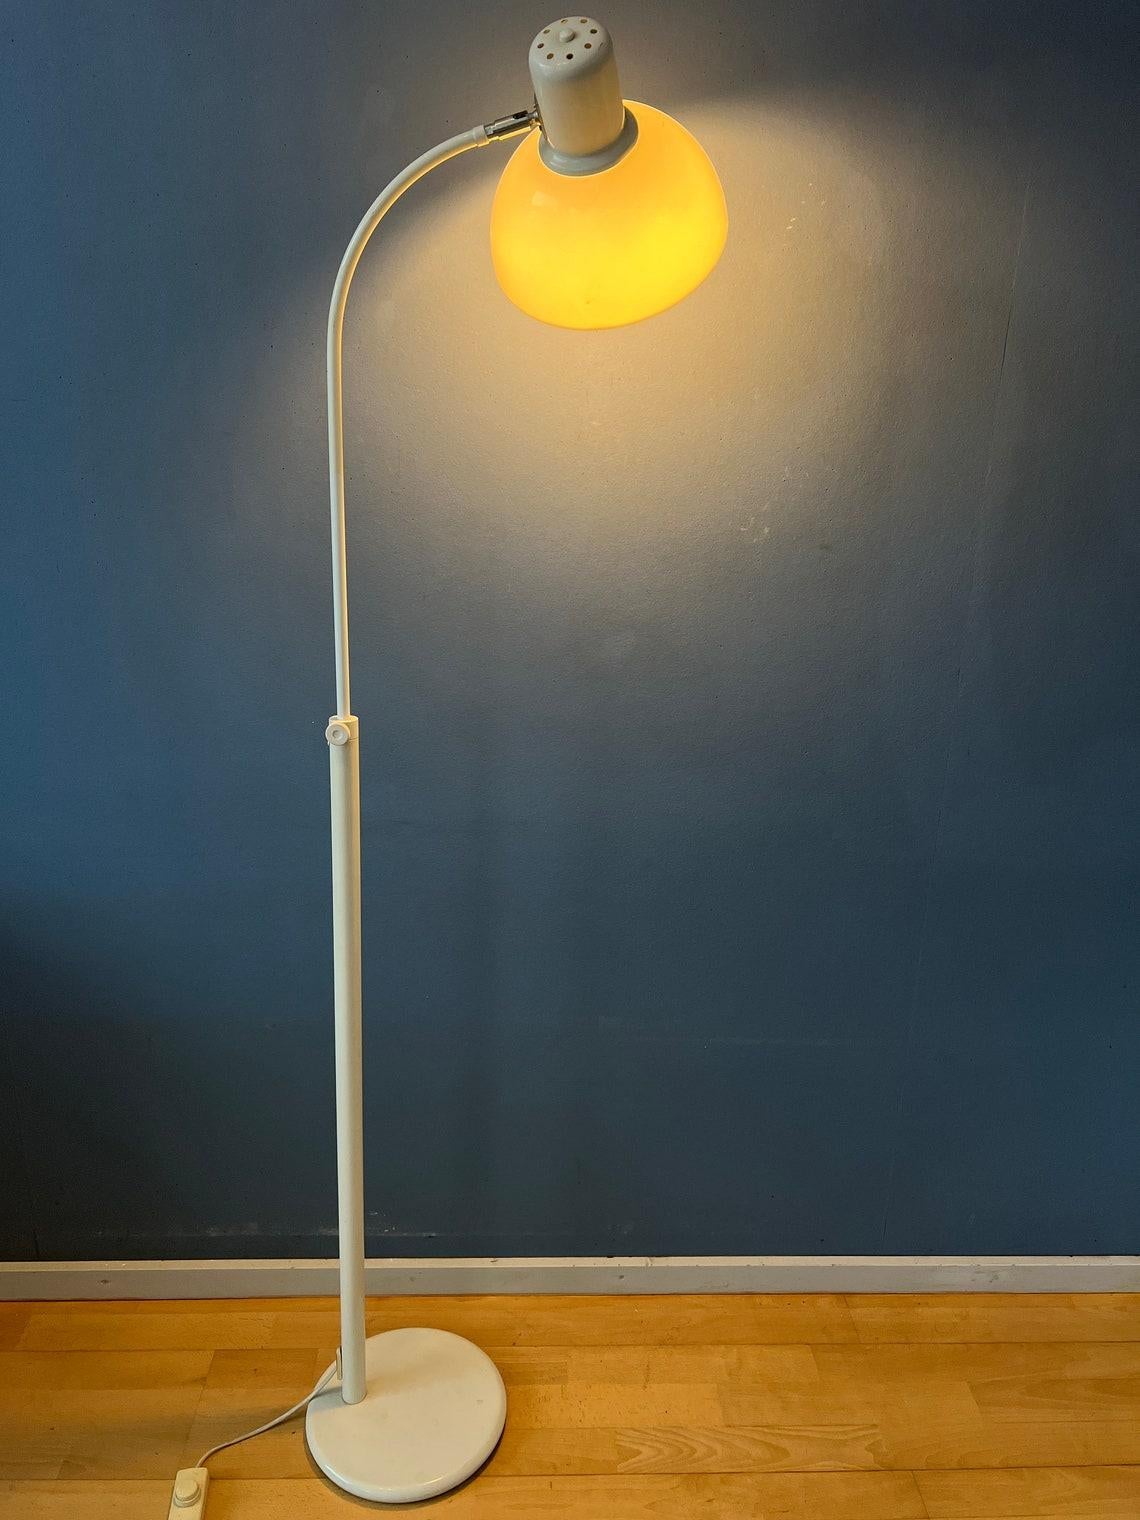 Adjustable white space age floor lamp with plexiglass shade. The lamp can easily be adjusted in height with the knob in the middle of the pole. Also the shade itself can be adjusted. This allows you to direct the light precisely where you need it,